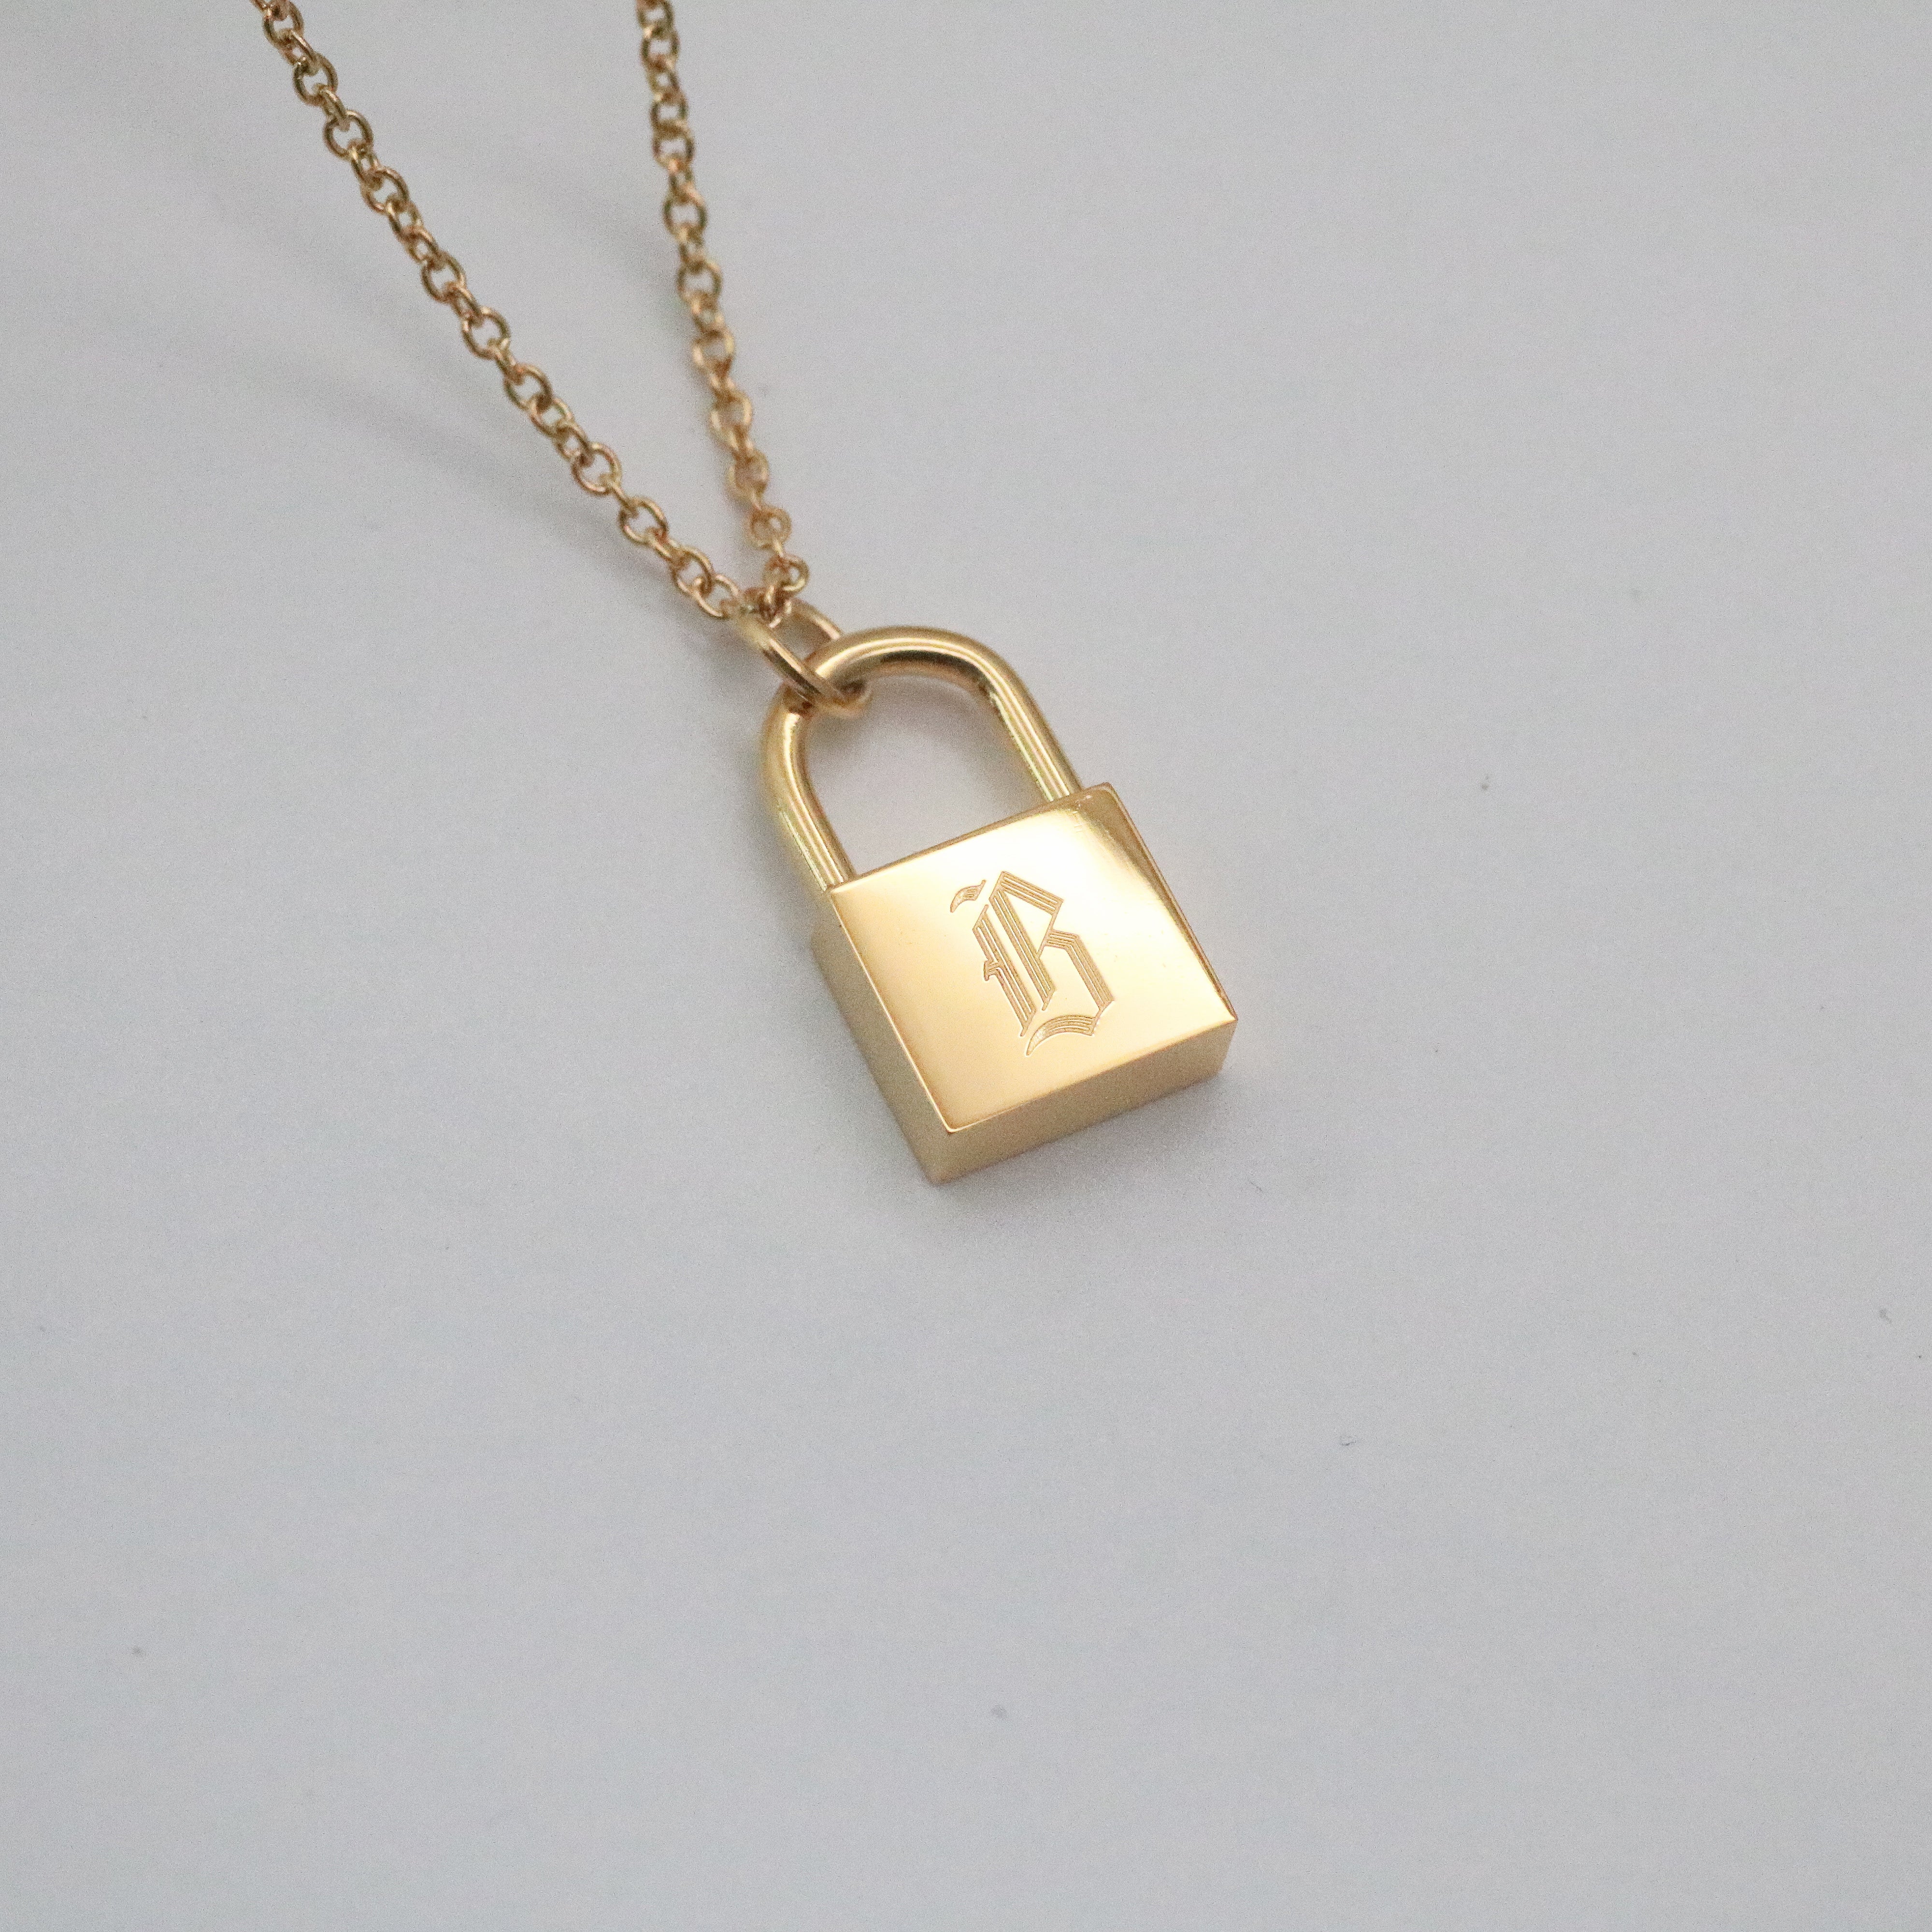 The Old English Engraved Lock Necklace